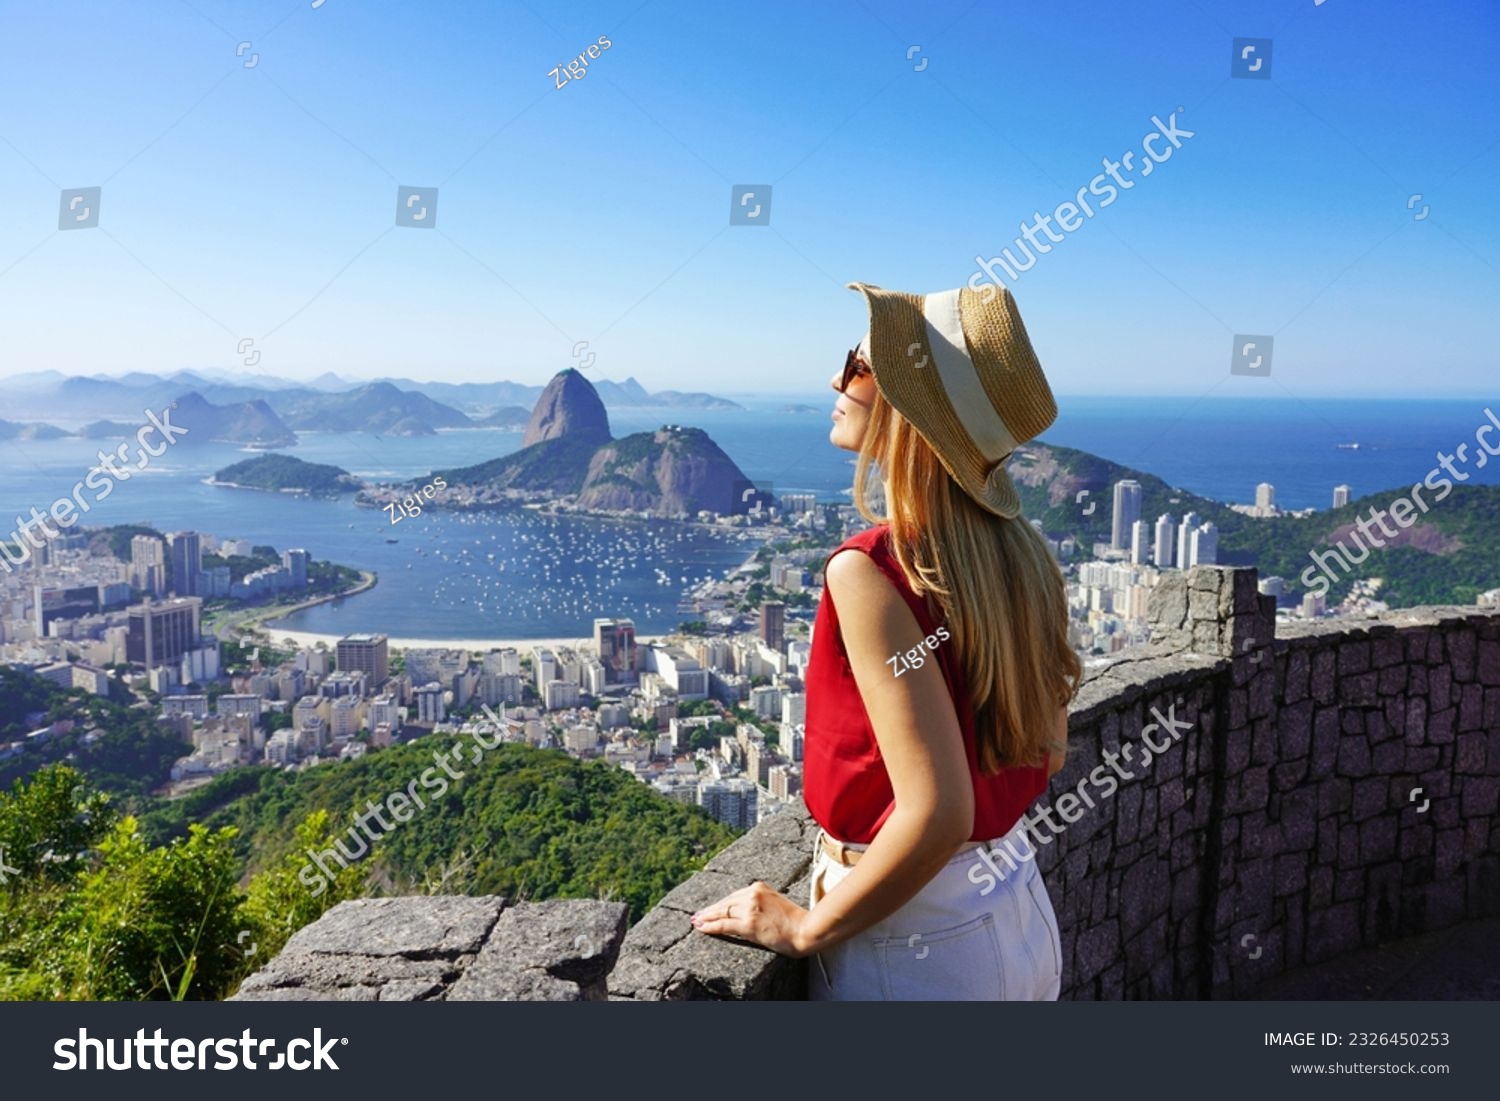 Fashion tourist woman on terrace in Rio de Janeiro with the famous Guanabara bay and the cityscape of Rio de Janerio, Brazil #2326450253